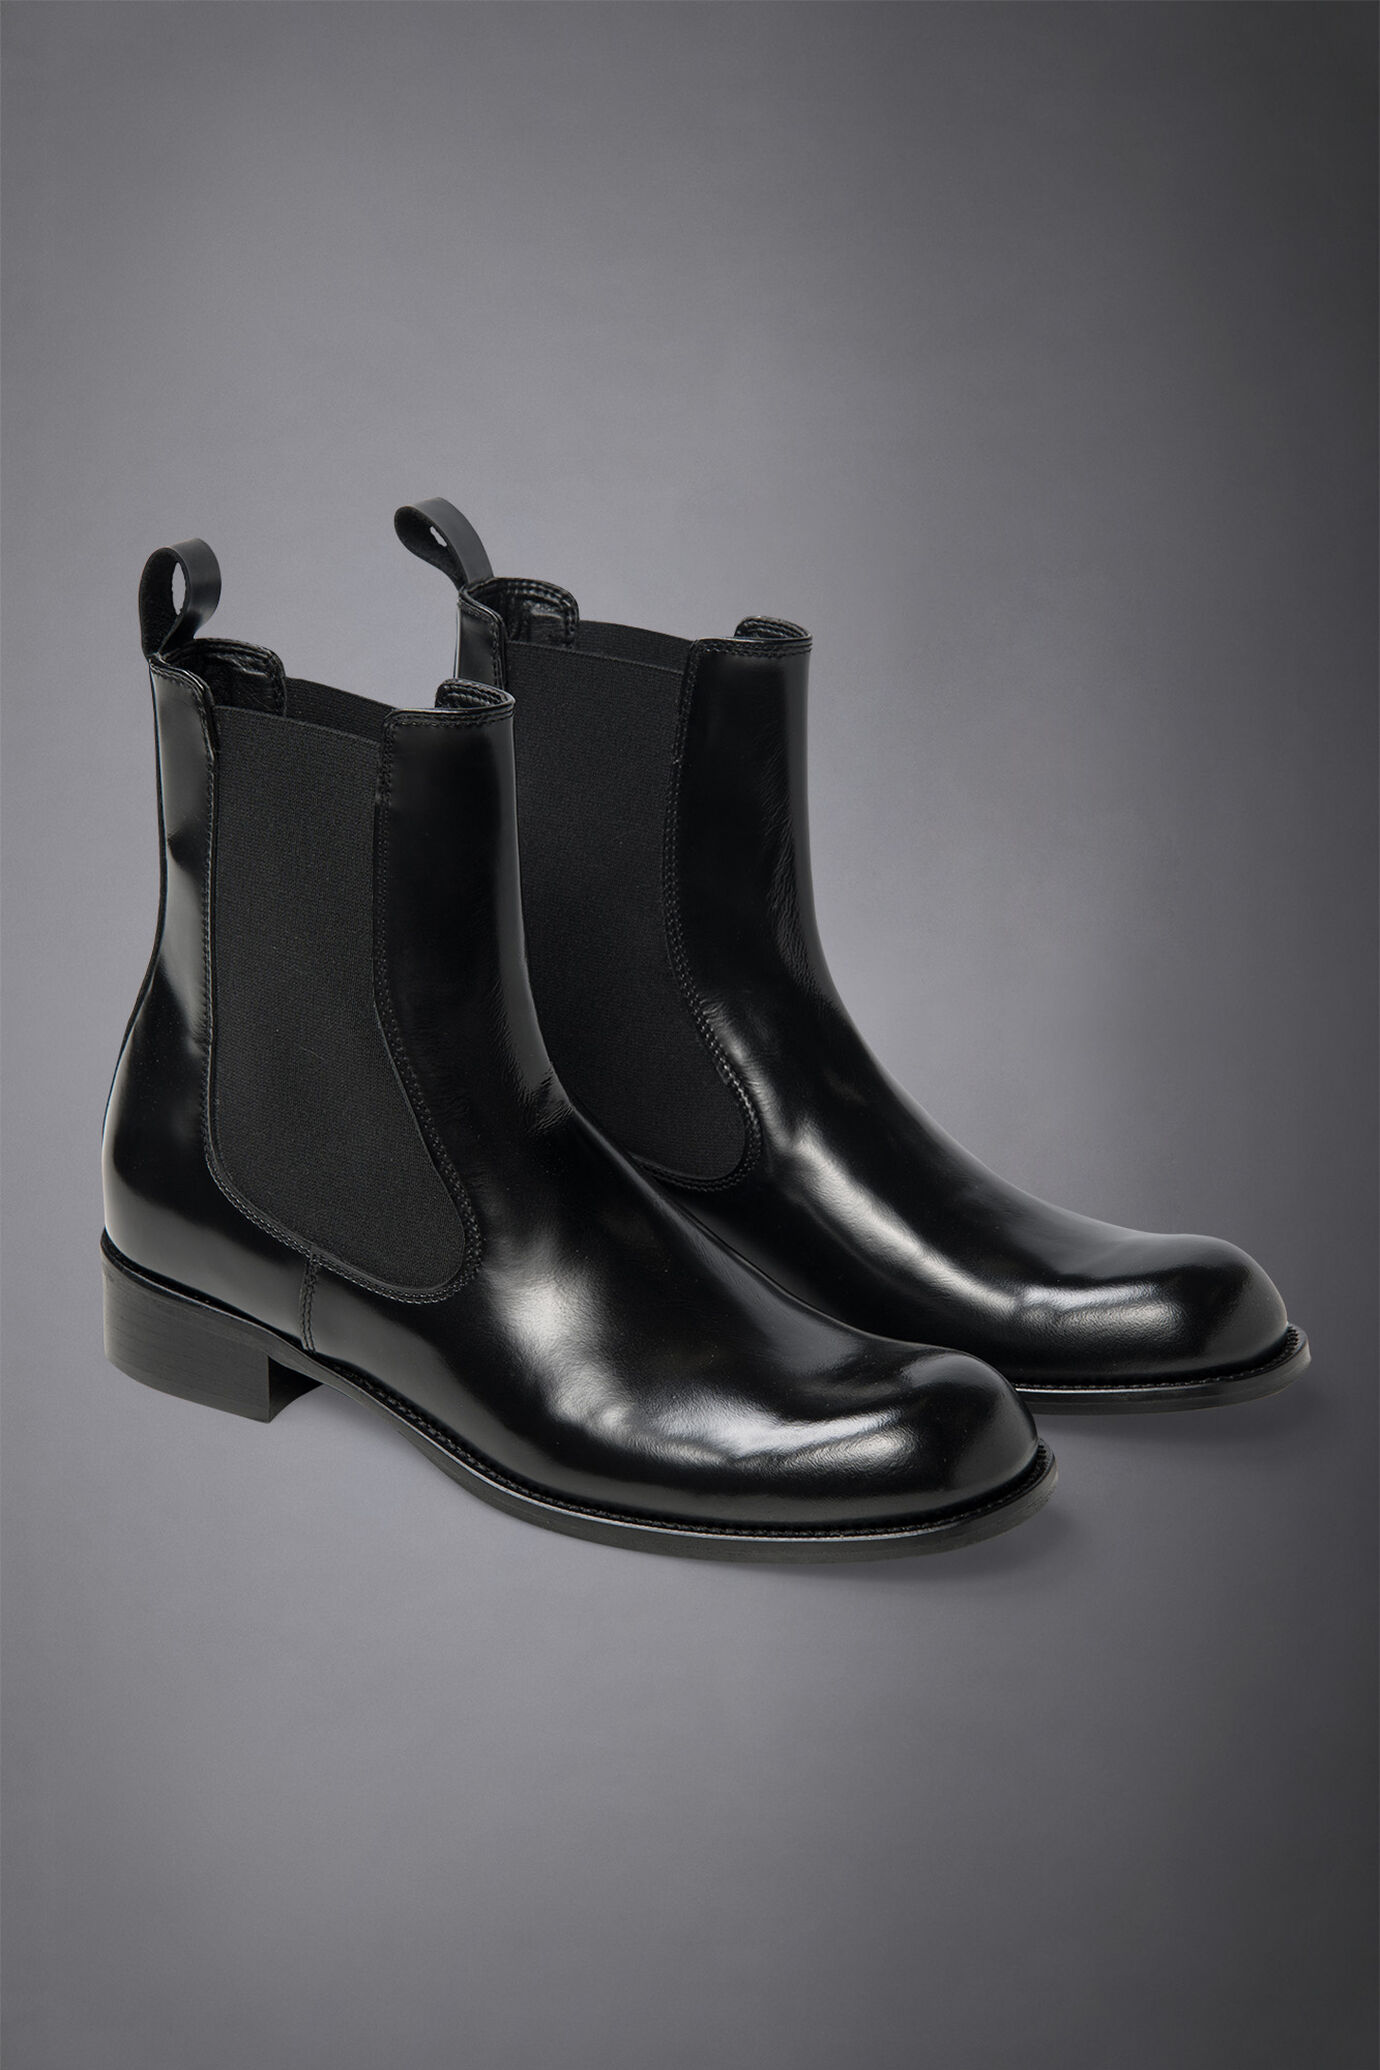 100% leather chelsea boots with thunit sole